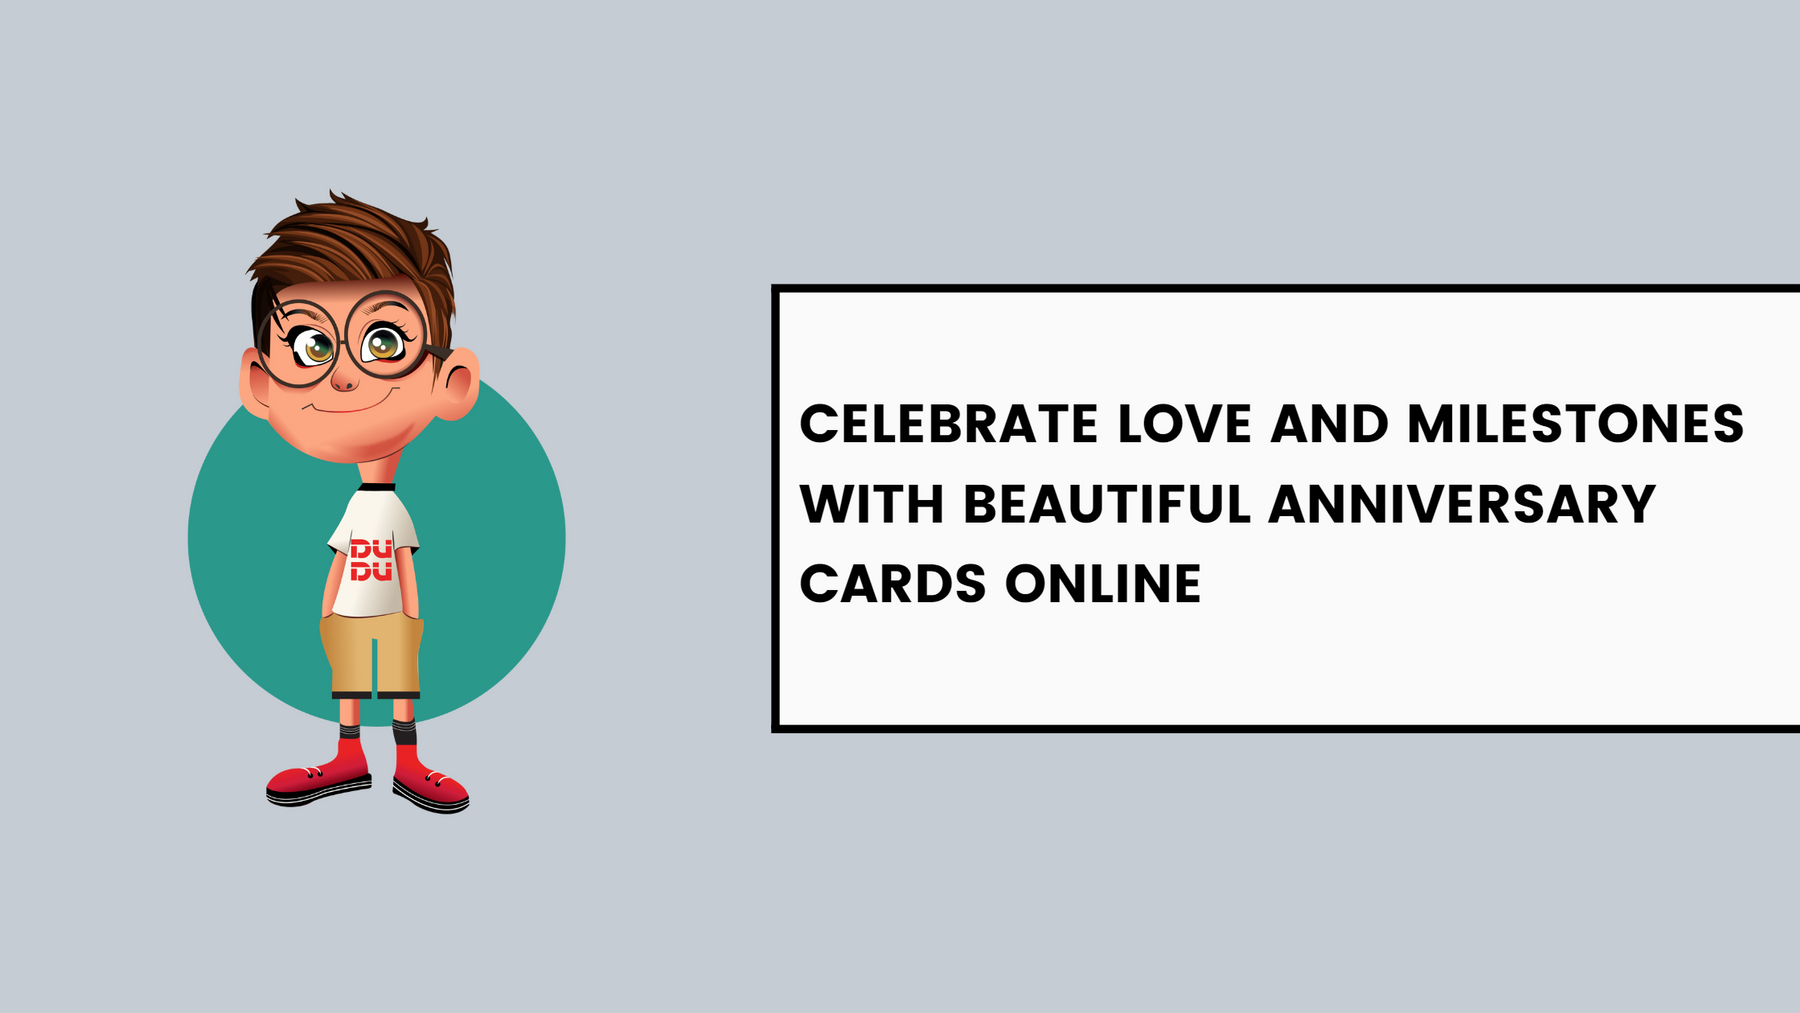 Celebrate Love and Milestones with Beautiful Anniversary Cards Online